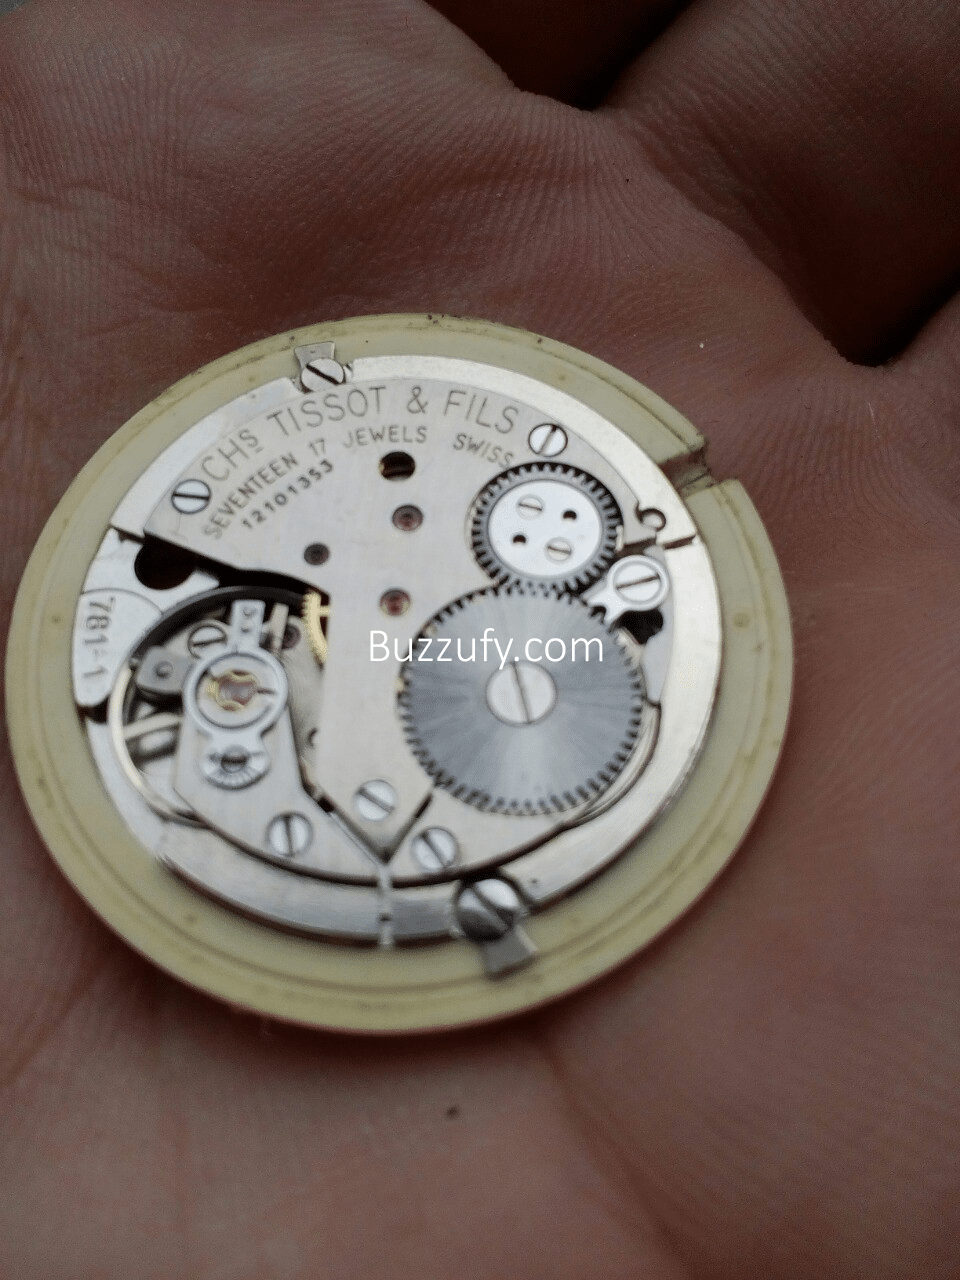 Tissot 781-1 movement - specifications and photo